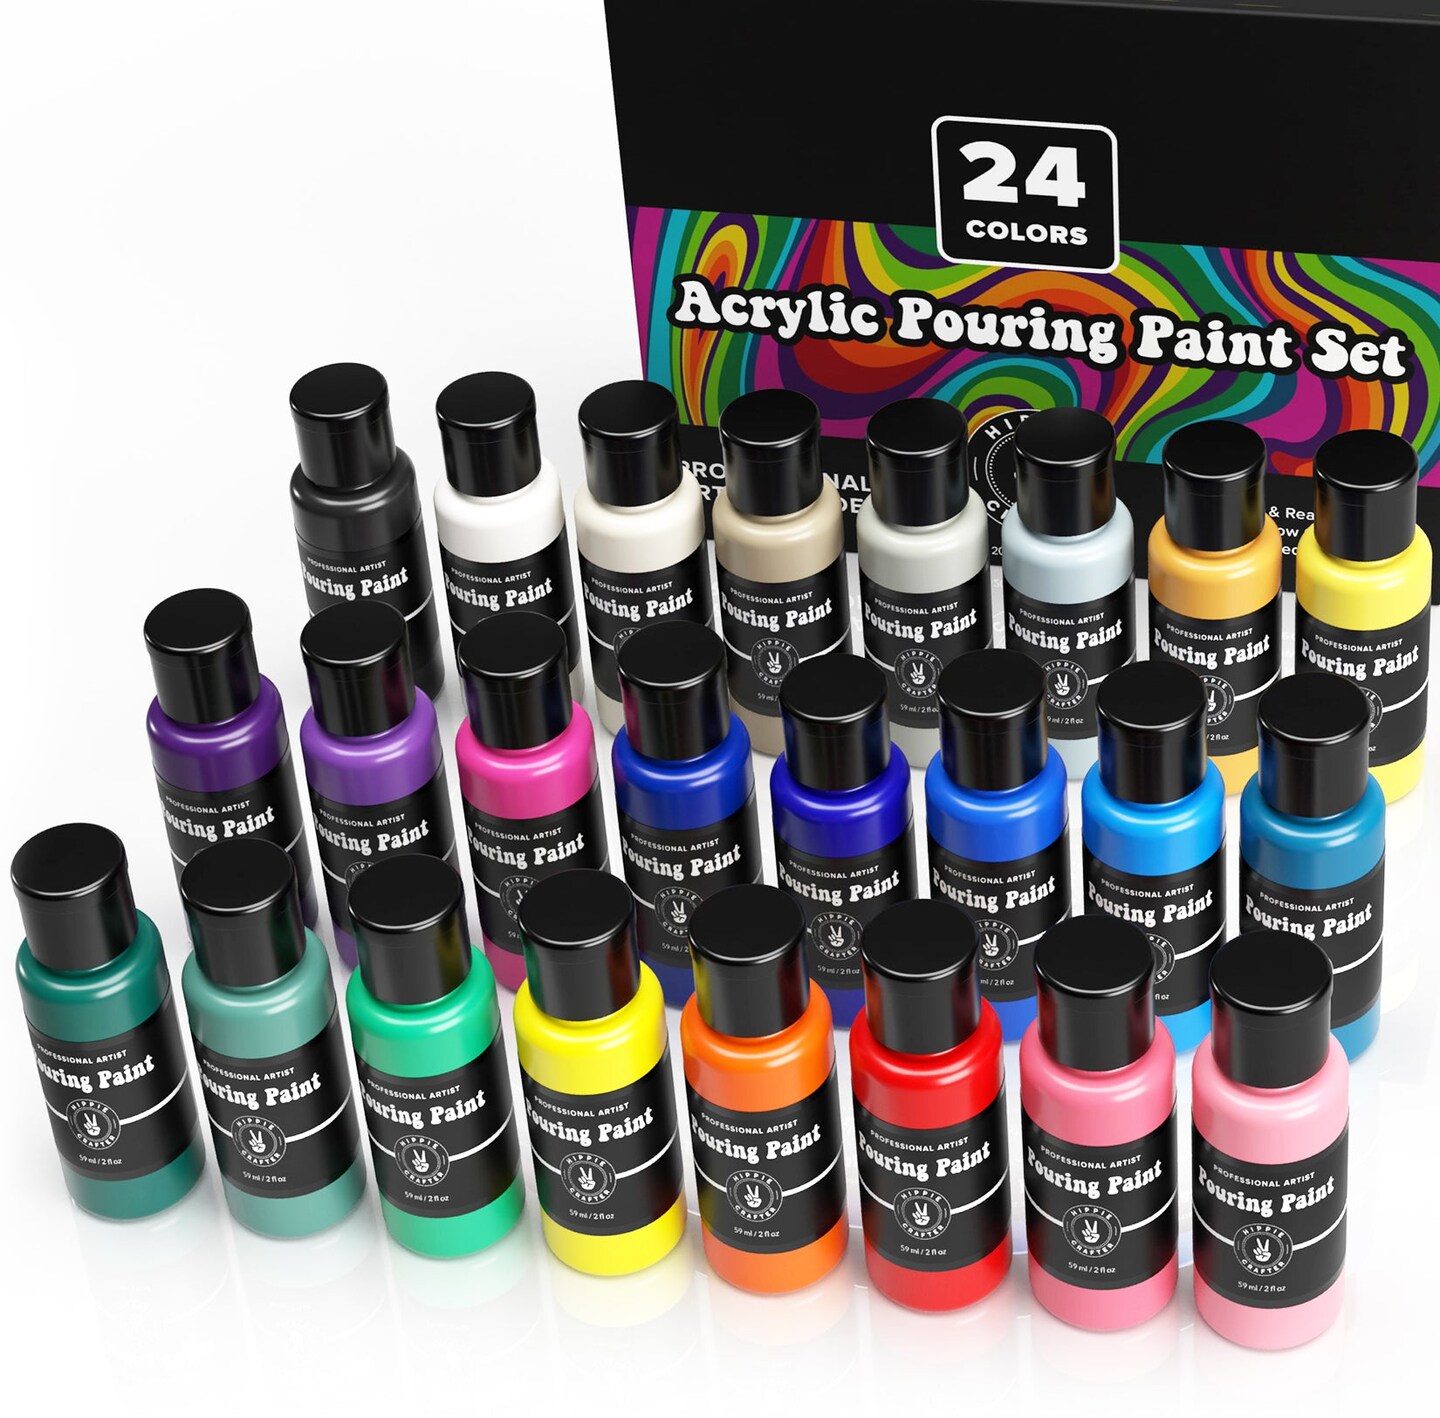 Acrylic Pouring Paint, Set of 18 Assorted Colors | 2oz Bottles of Premixed Ready to Pour Acrylic Paint, No Mixing Medium Required | Non-Toxic High